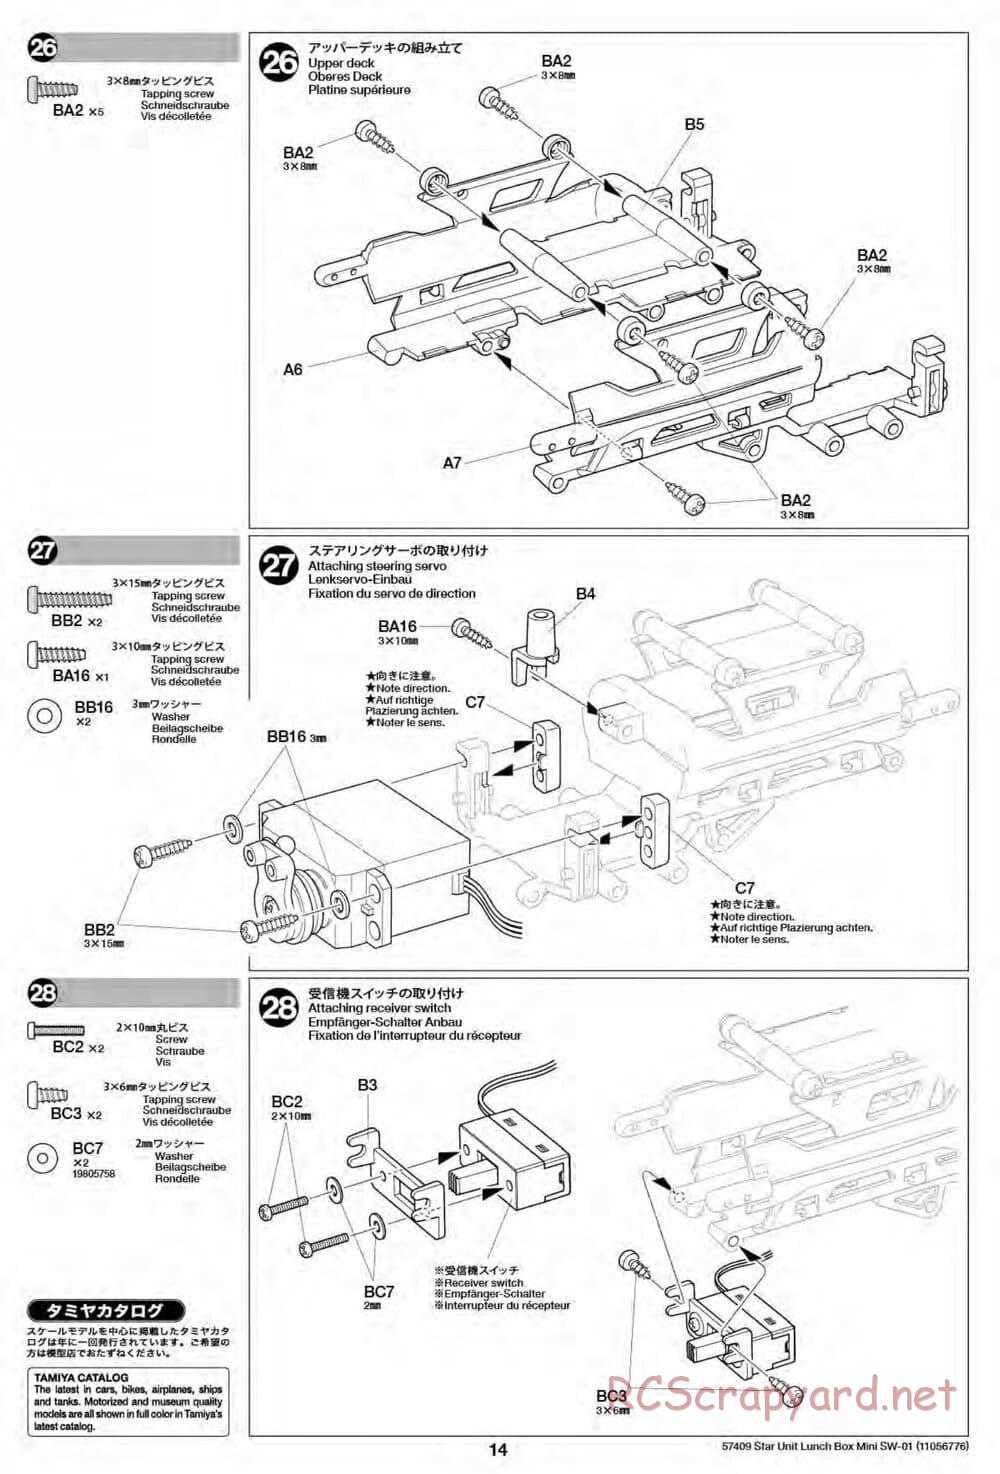 Tamiya - Lunch Box Mini - SW-01 Chassis - Manual - Page 14